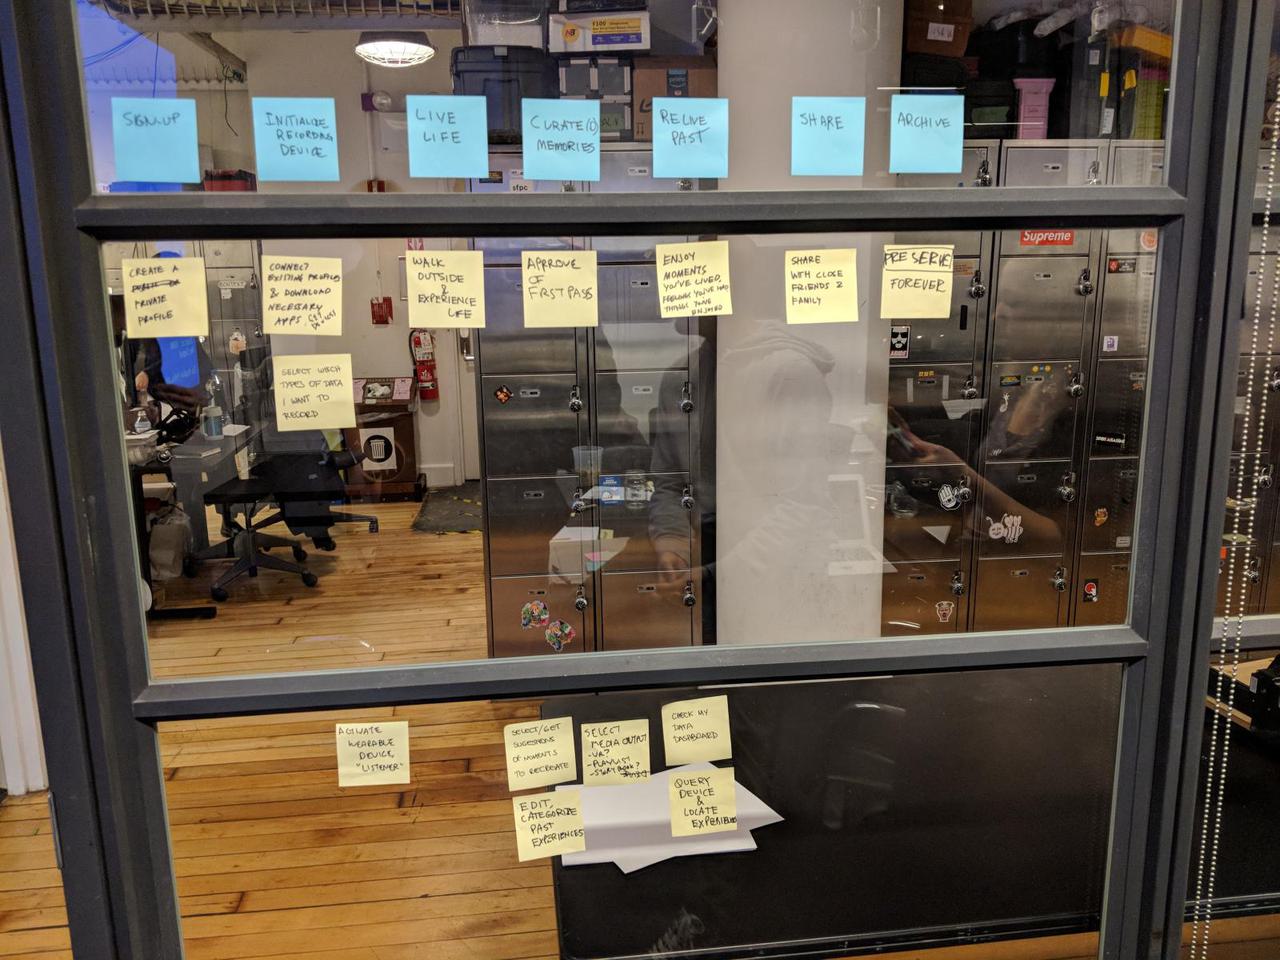 postit notes neatly arranged on glass wall. each postit note contains one discrete step in our user timeline.